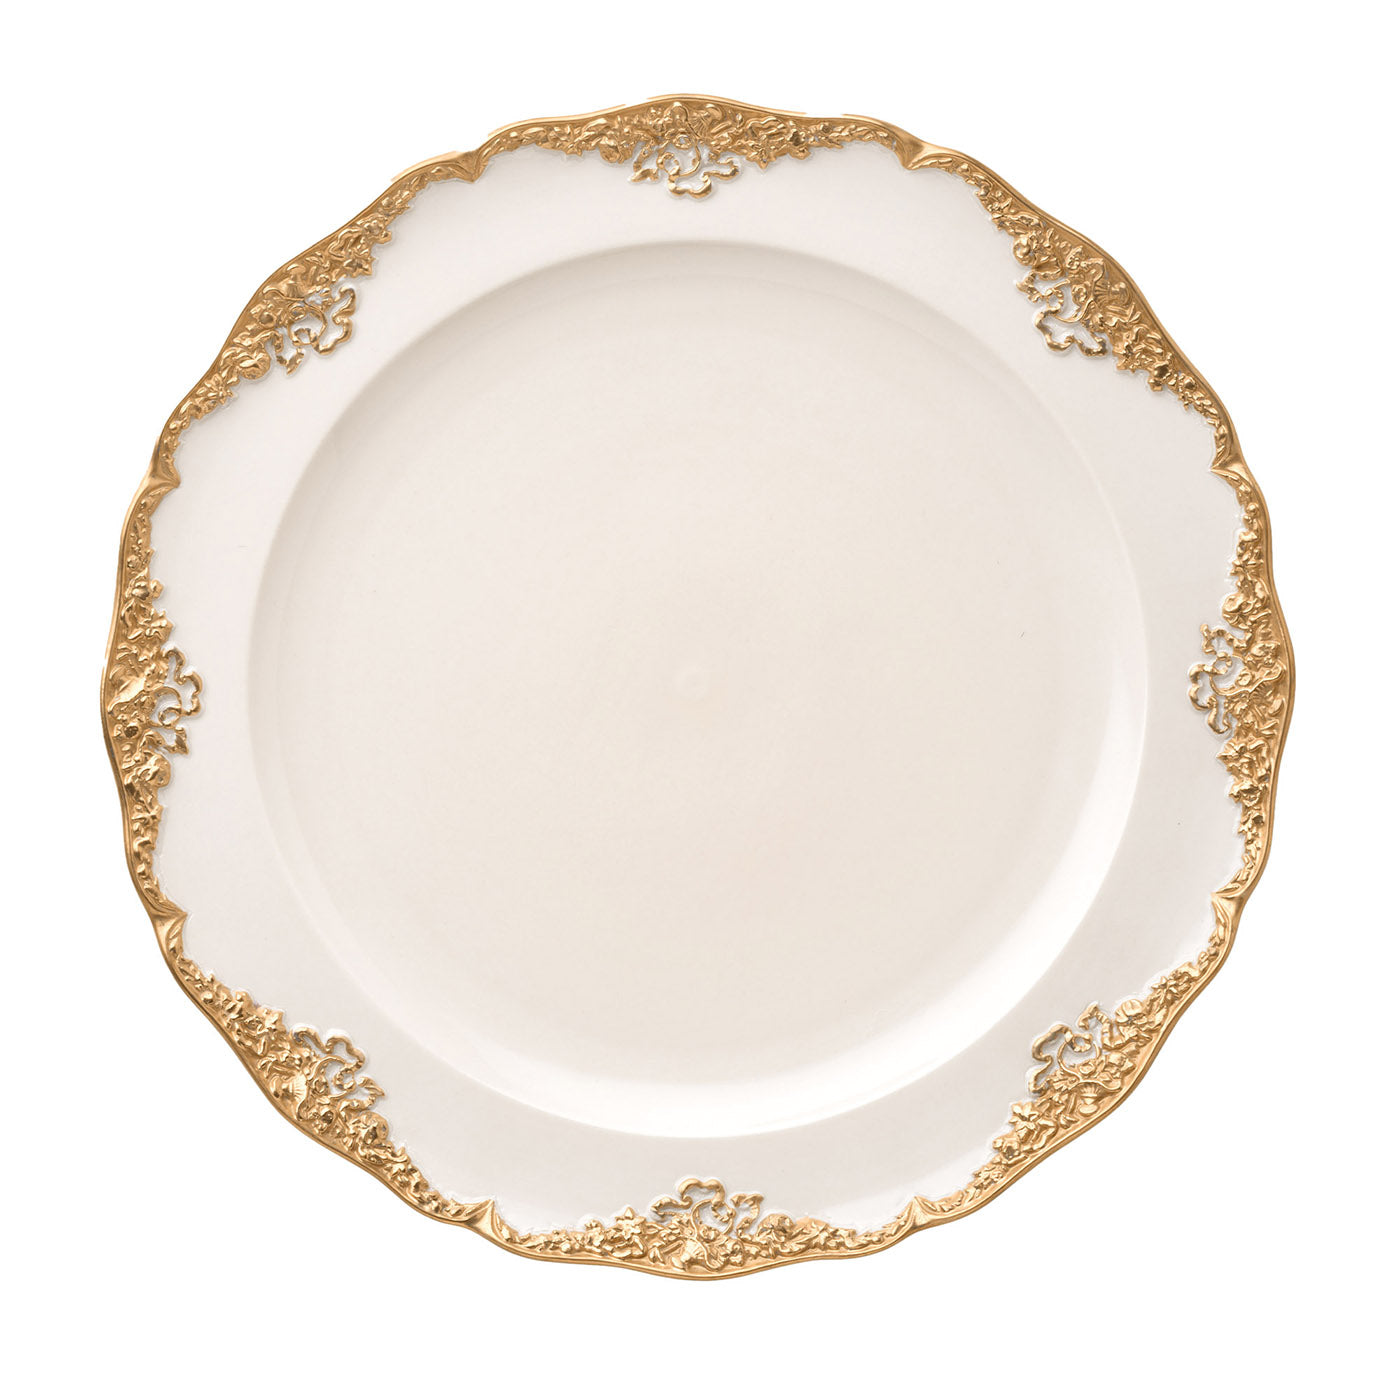 Irene Set of 2 White & Gold Serving Plates - Main view